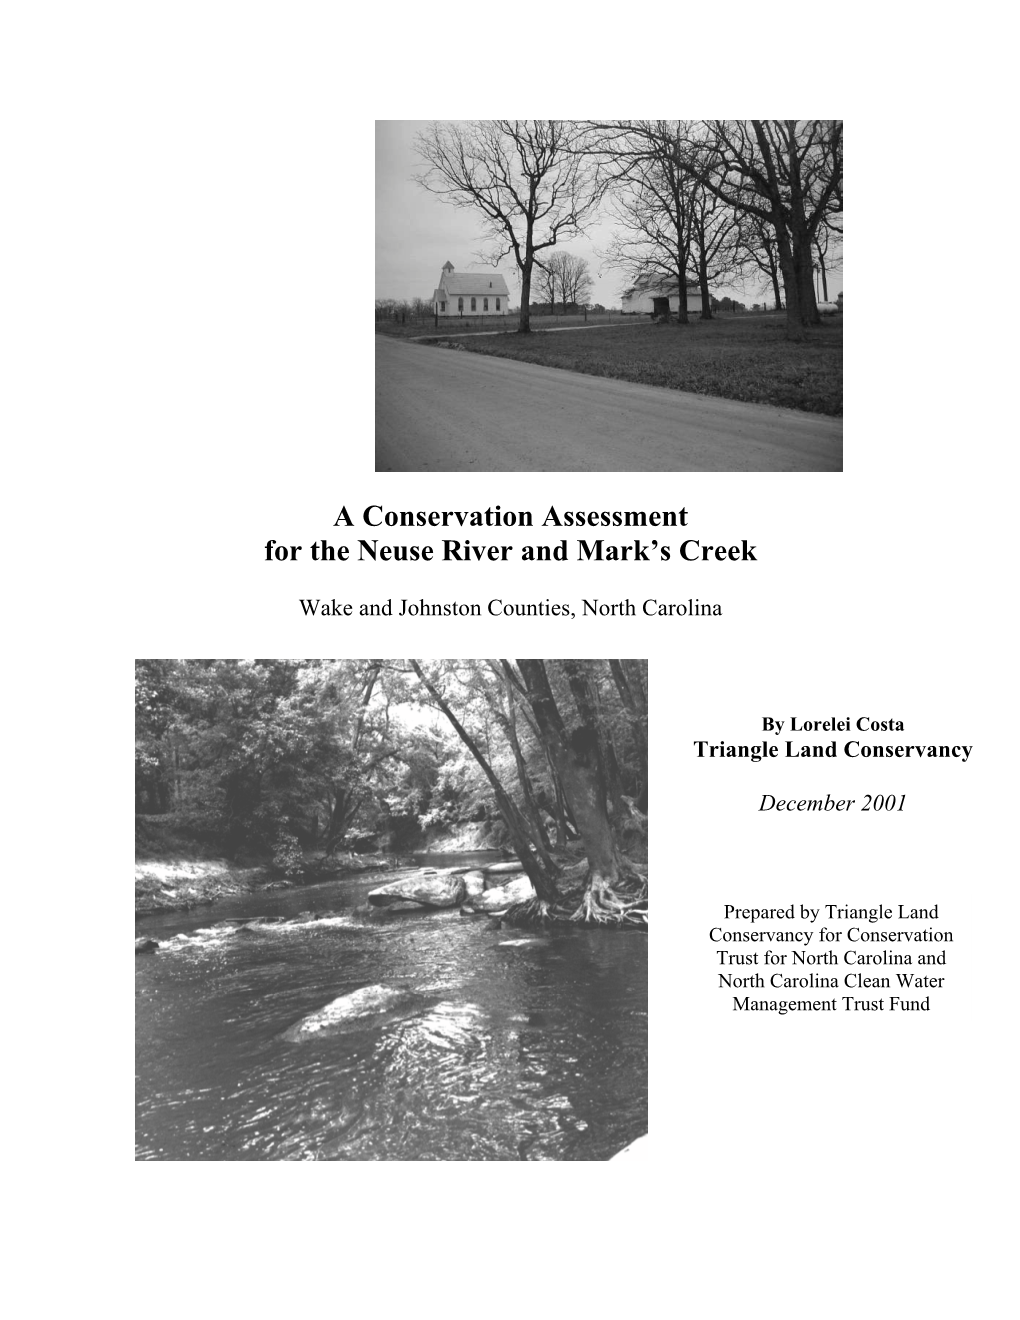 A Conservation Assessment for the Neuse River and Mark's Creek, 2001